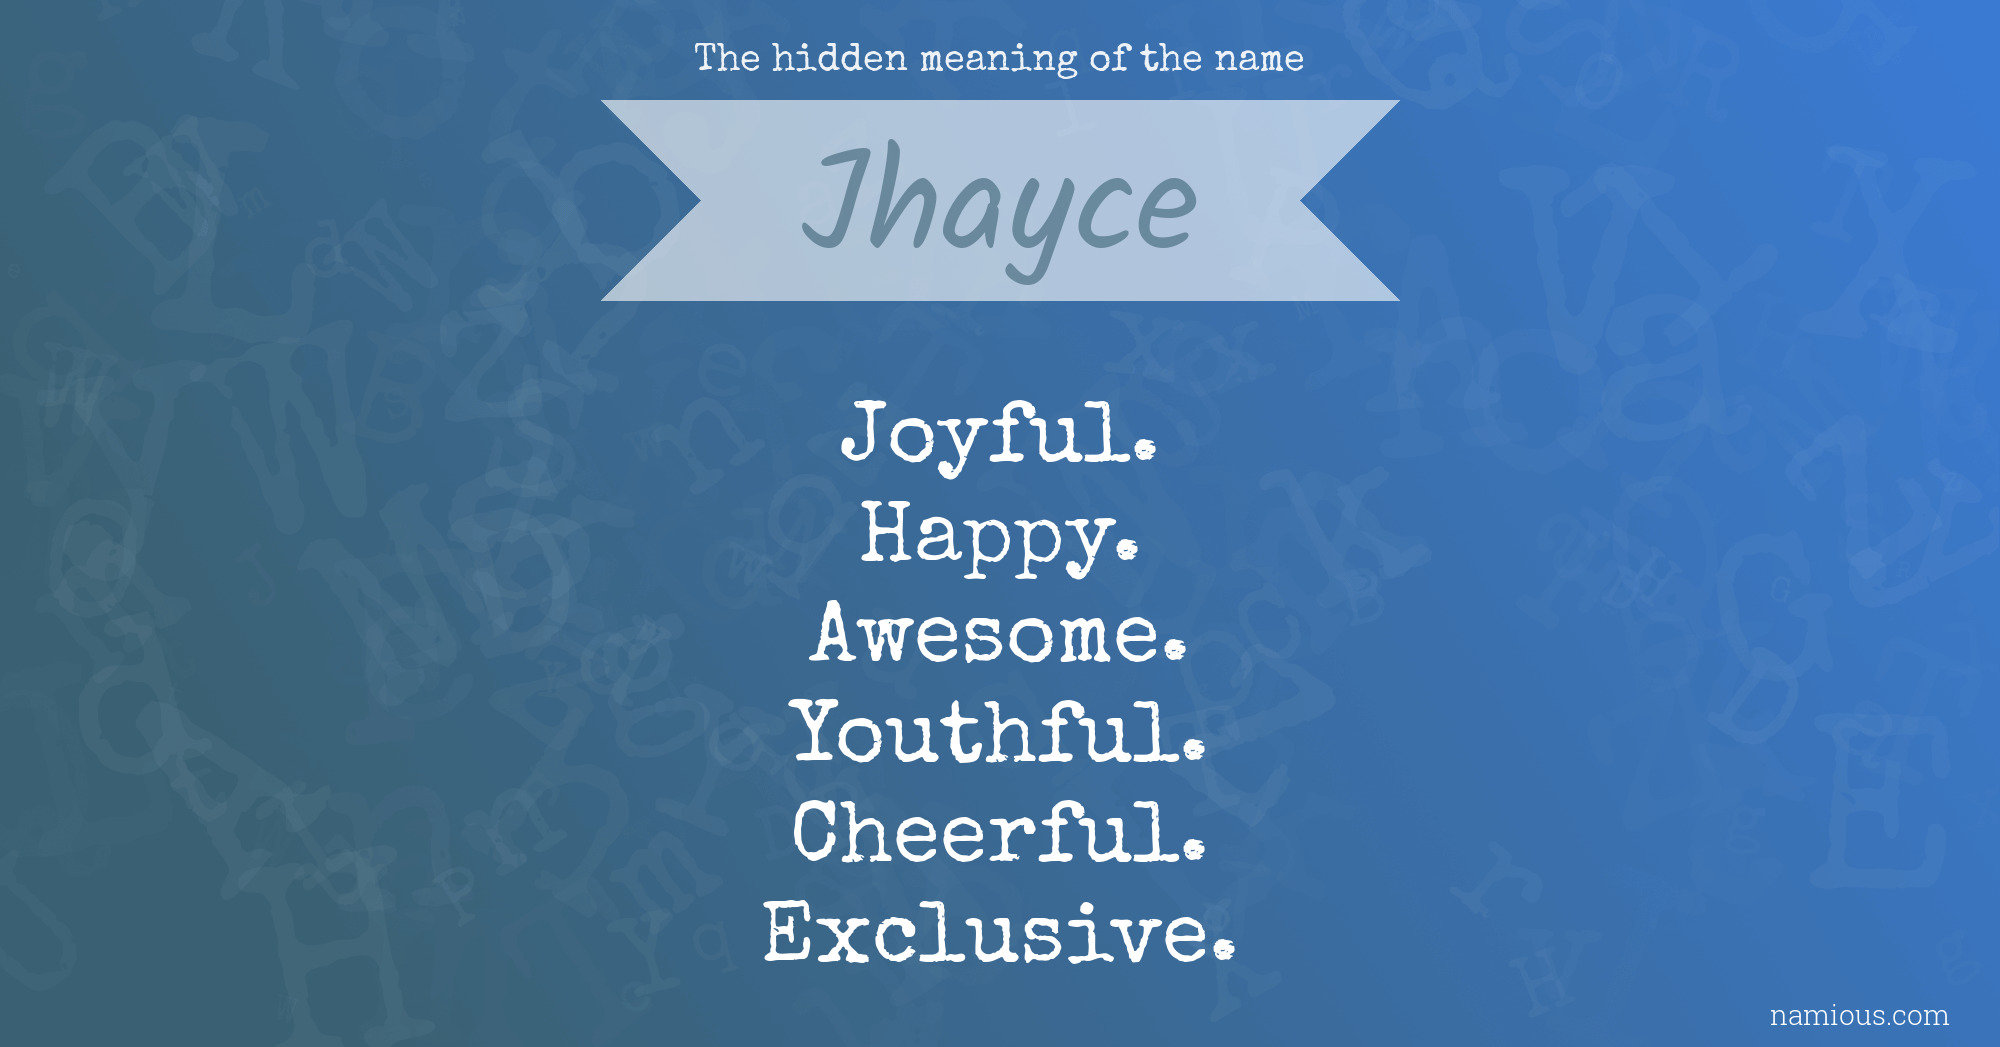 The hidden meaning of the name Jhayce